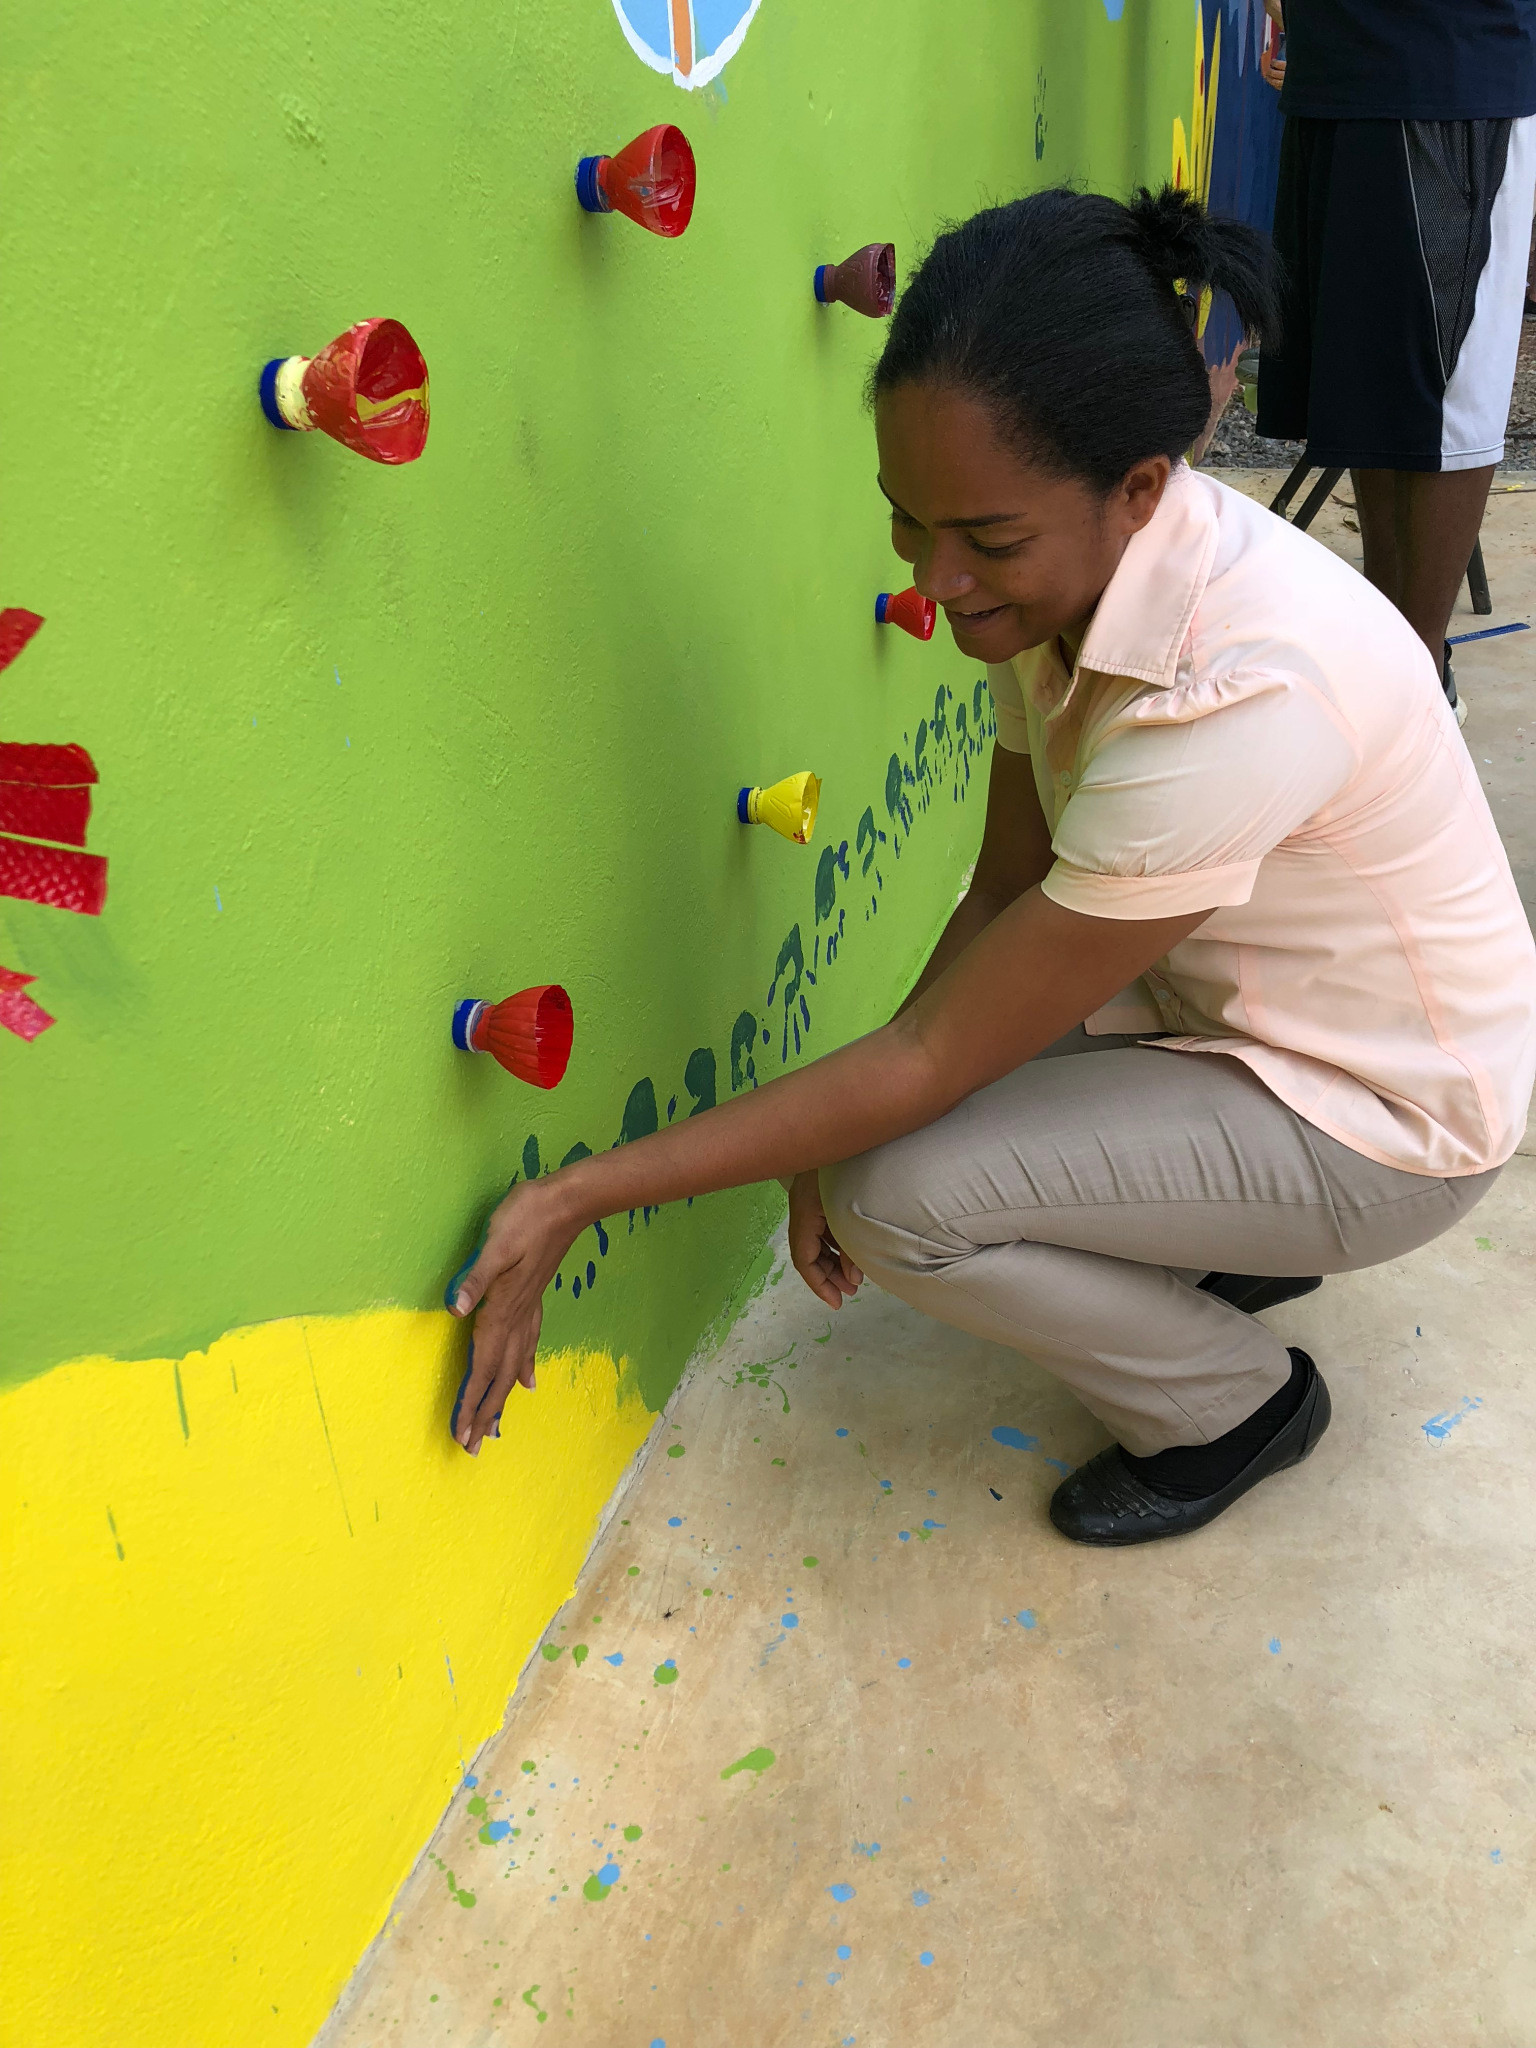 A student uses her handprint to help create a caterpillar on a mural outside a school in the Dominican Republic.